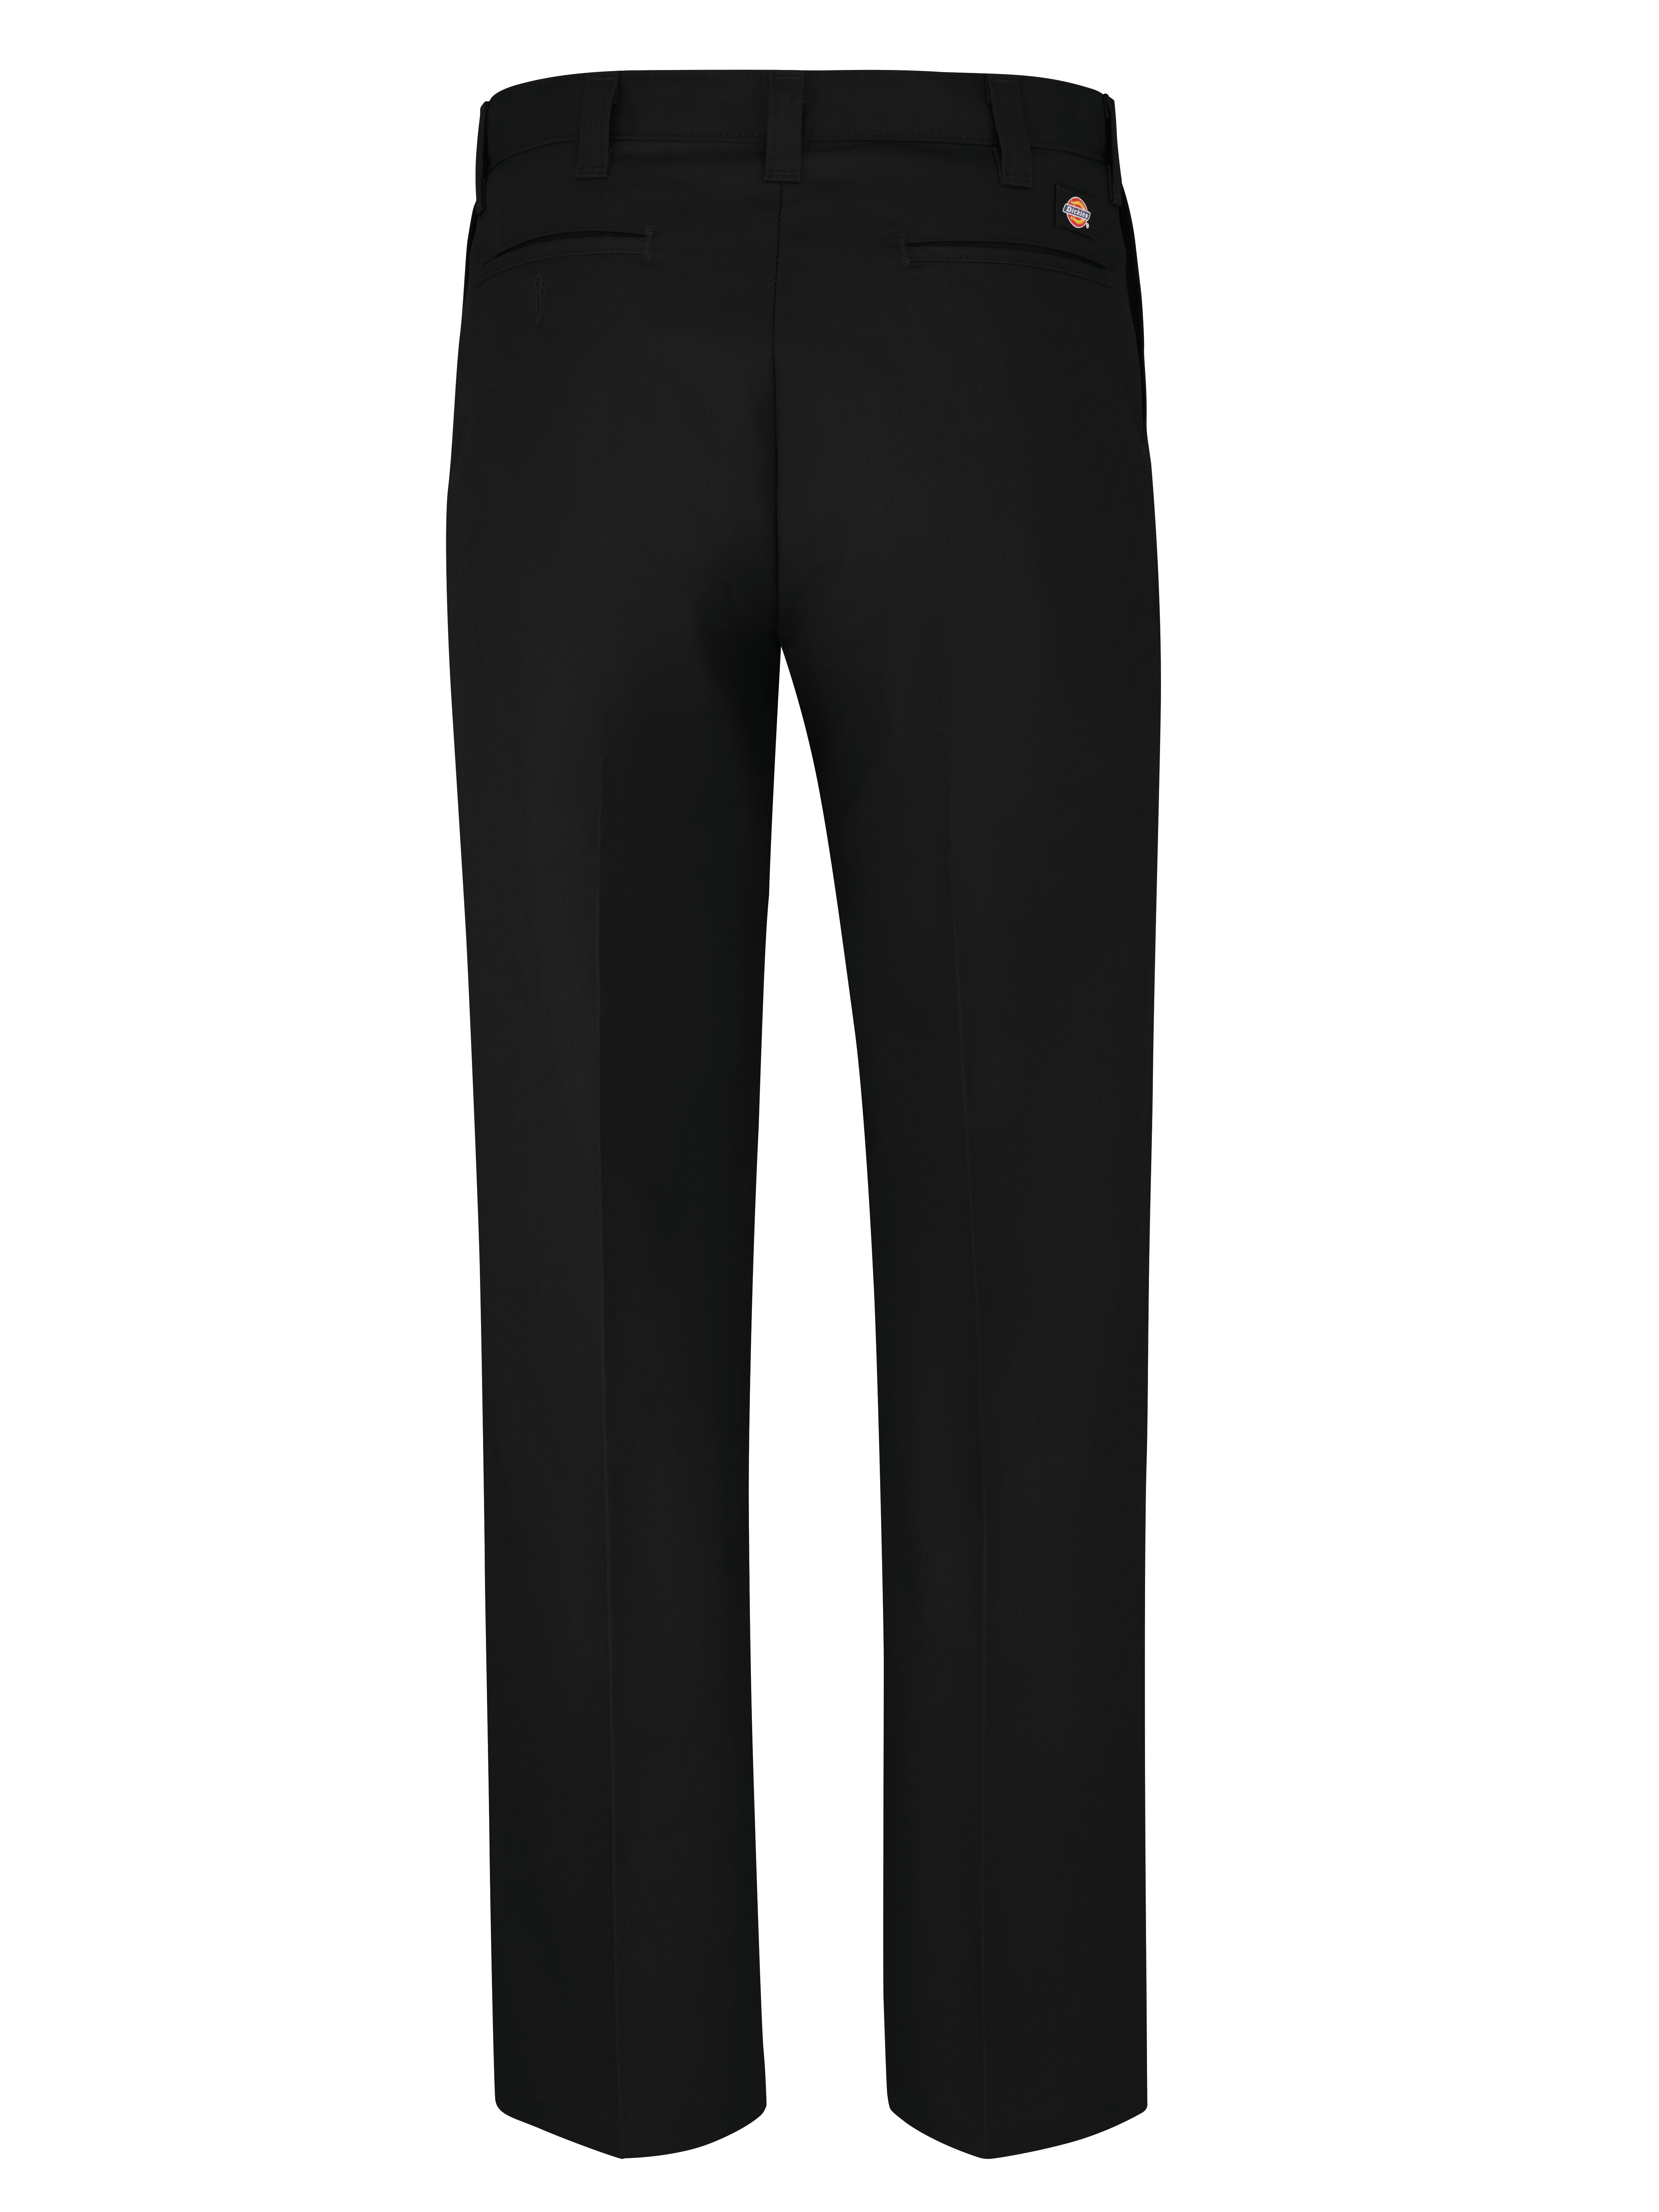 Picture of Dickies® LP92 Men's Industrial Flat Front Pant